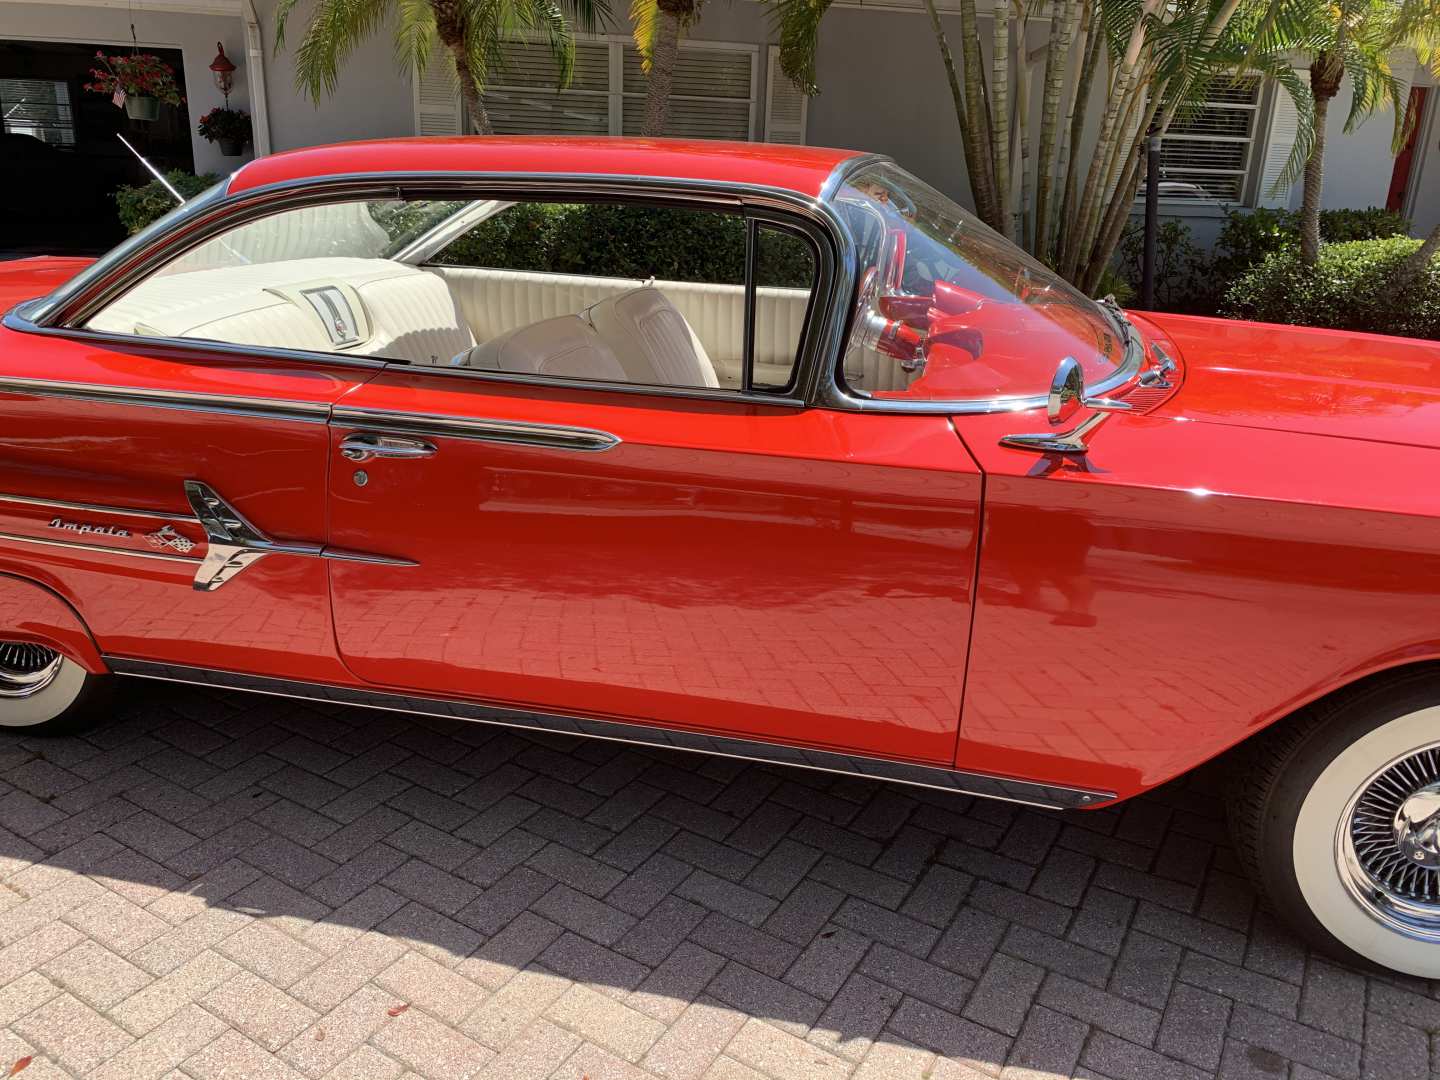 4th Image of a 1960 CHEVROLET IMPALA